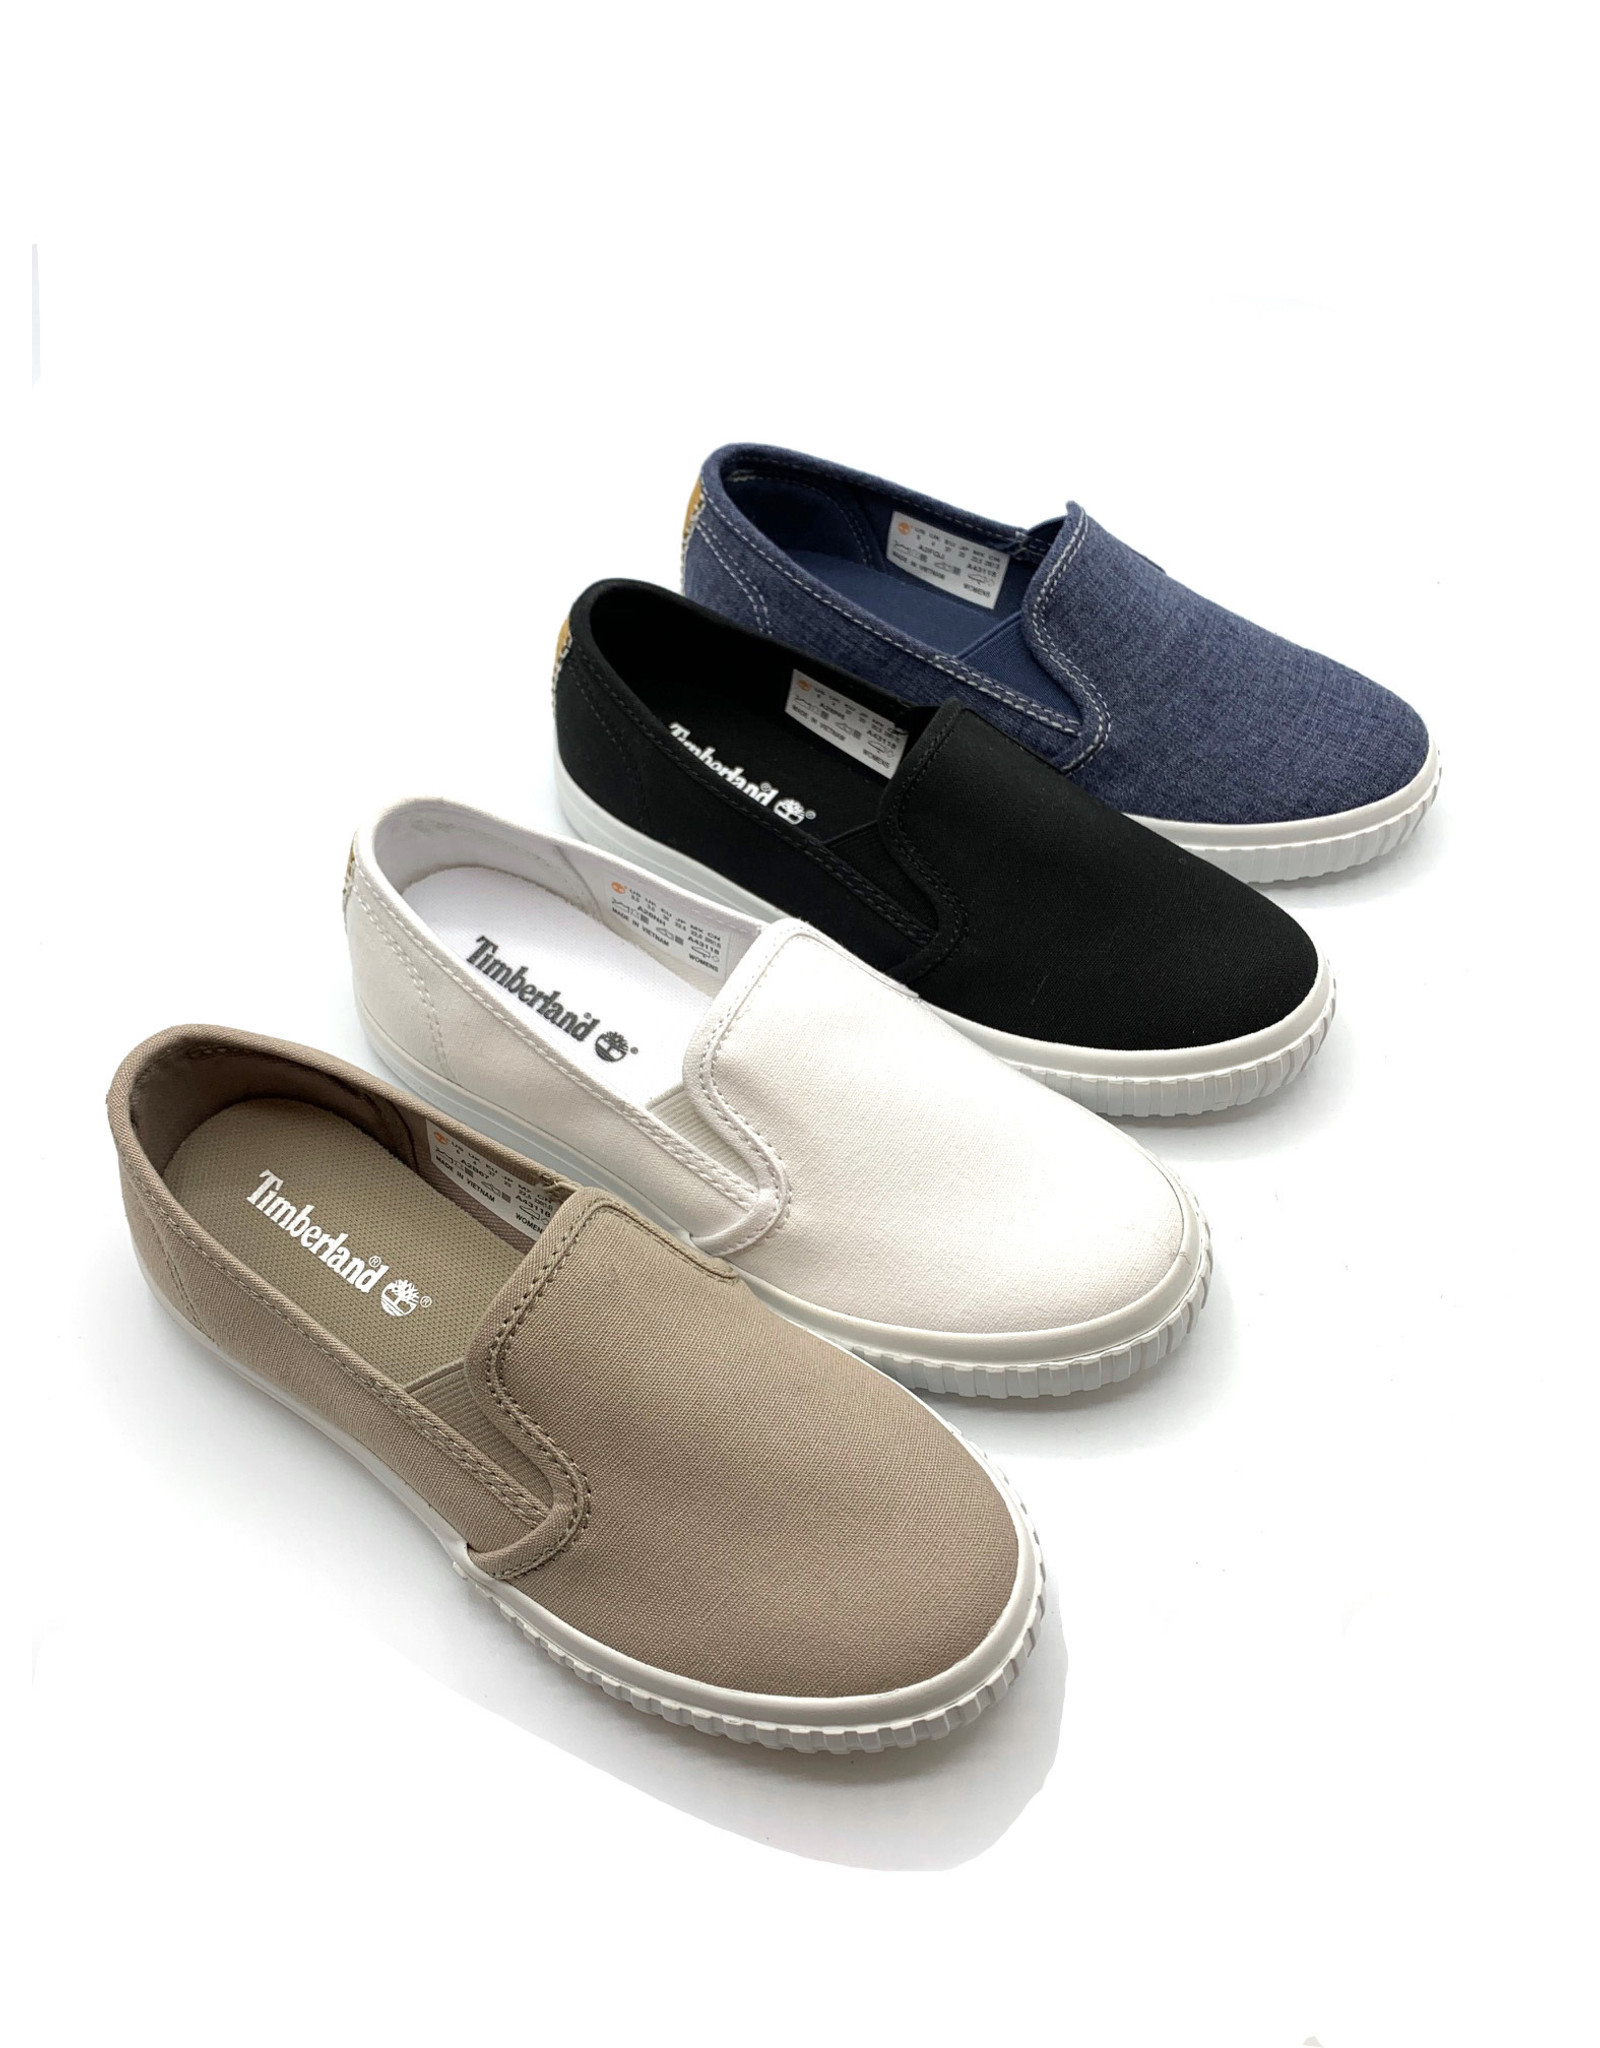 Newport Bay Slip On - Waterlily Shoes